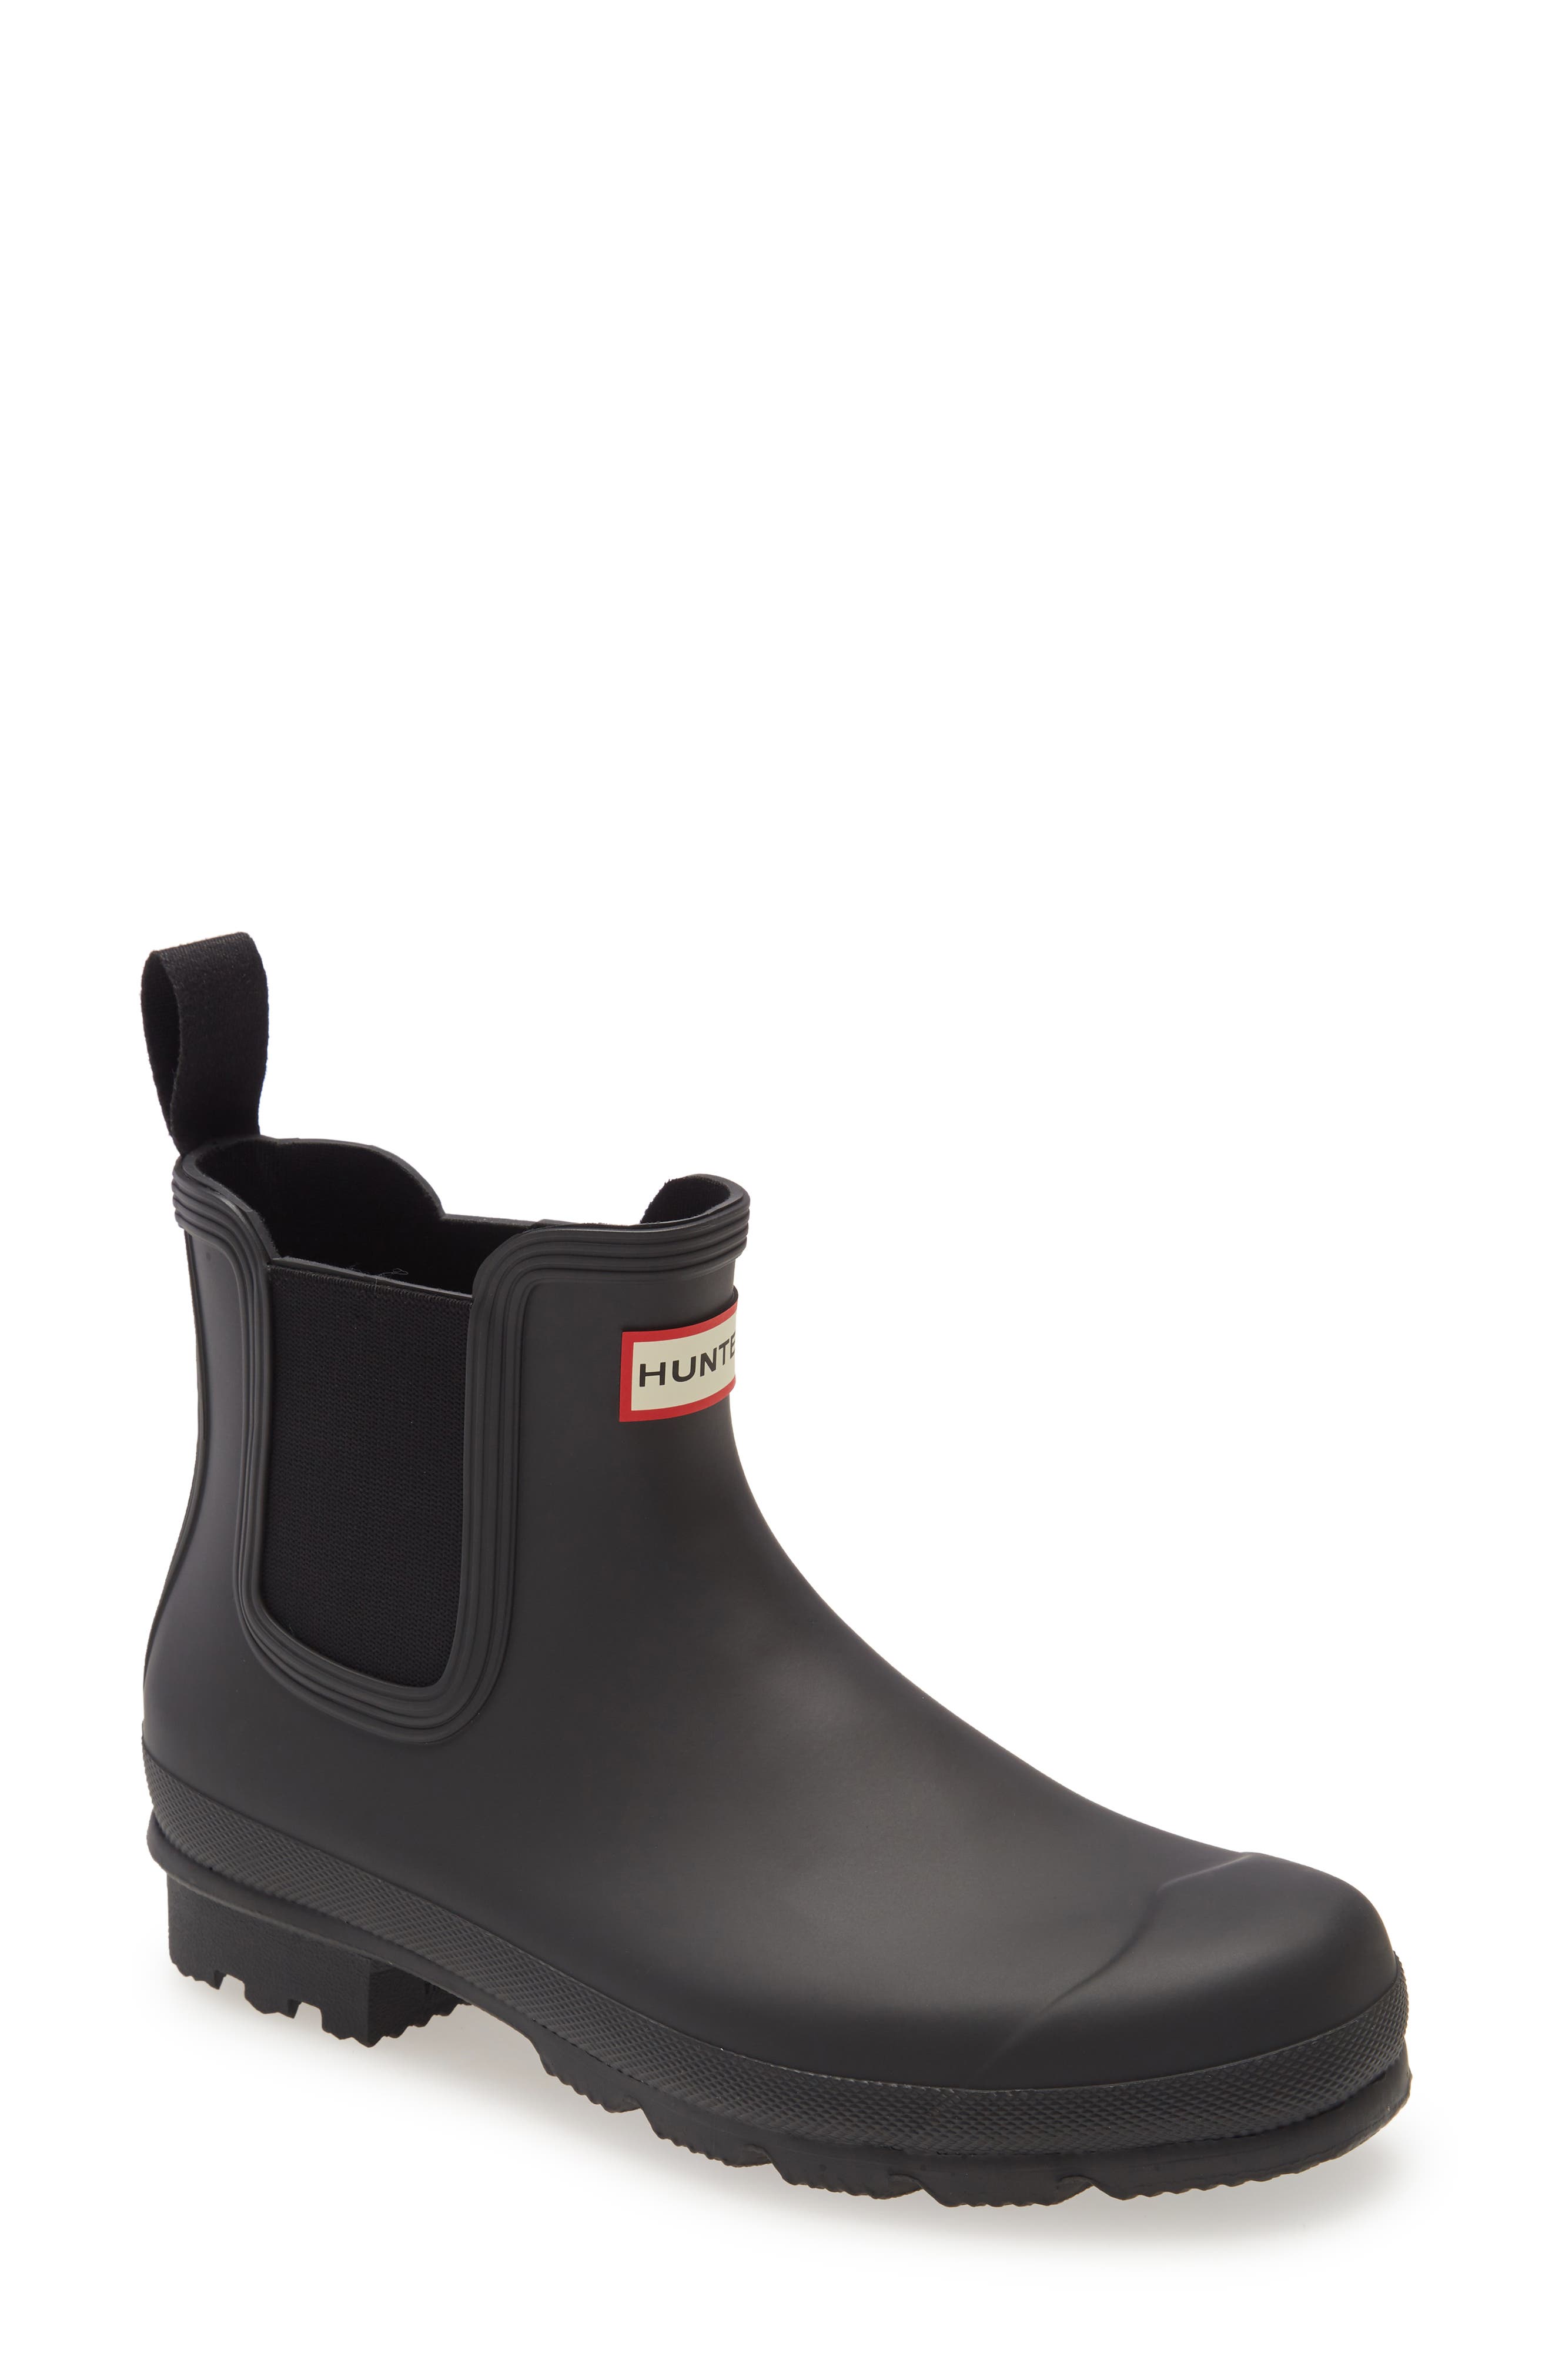 hunter boots low top